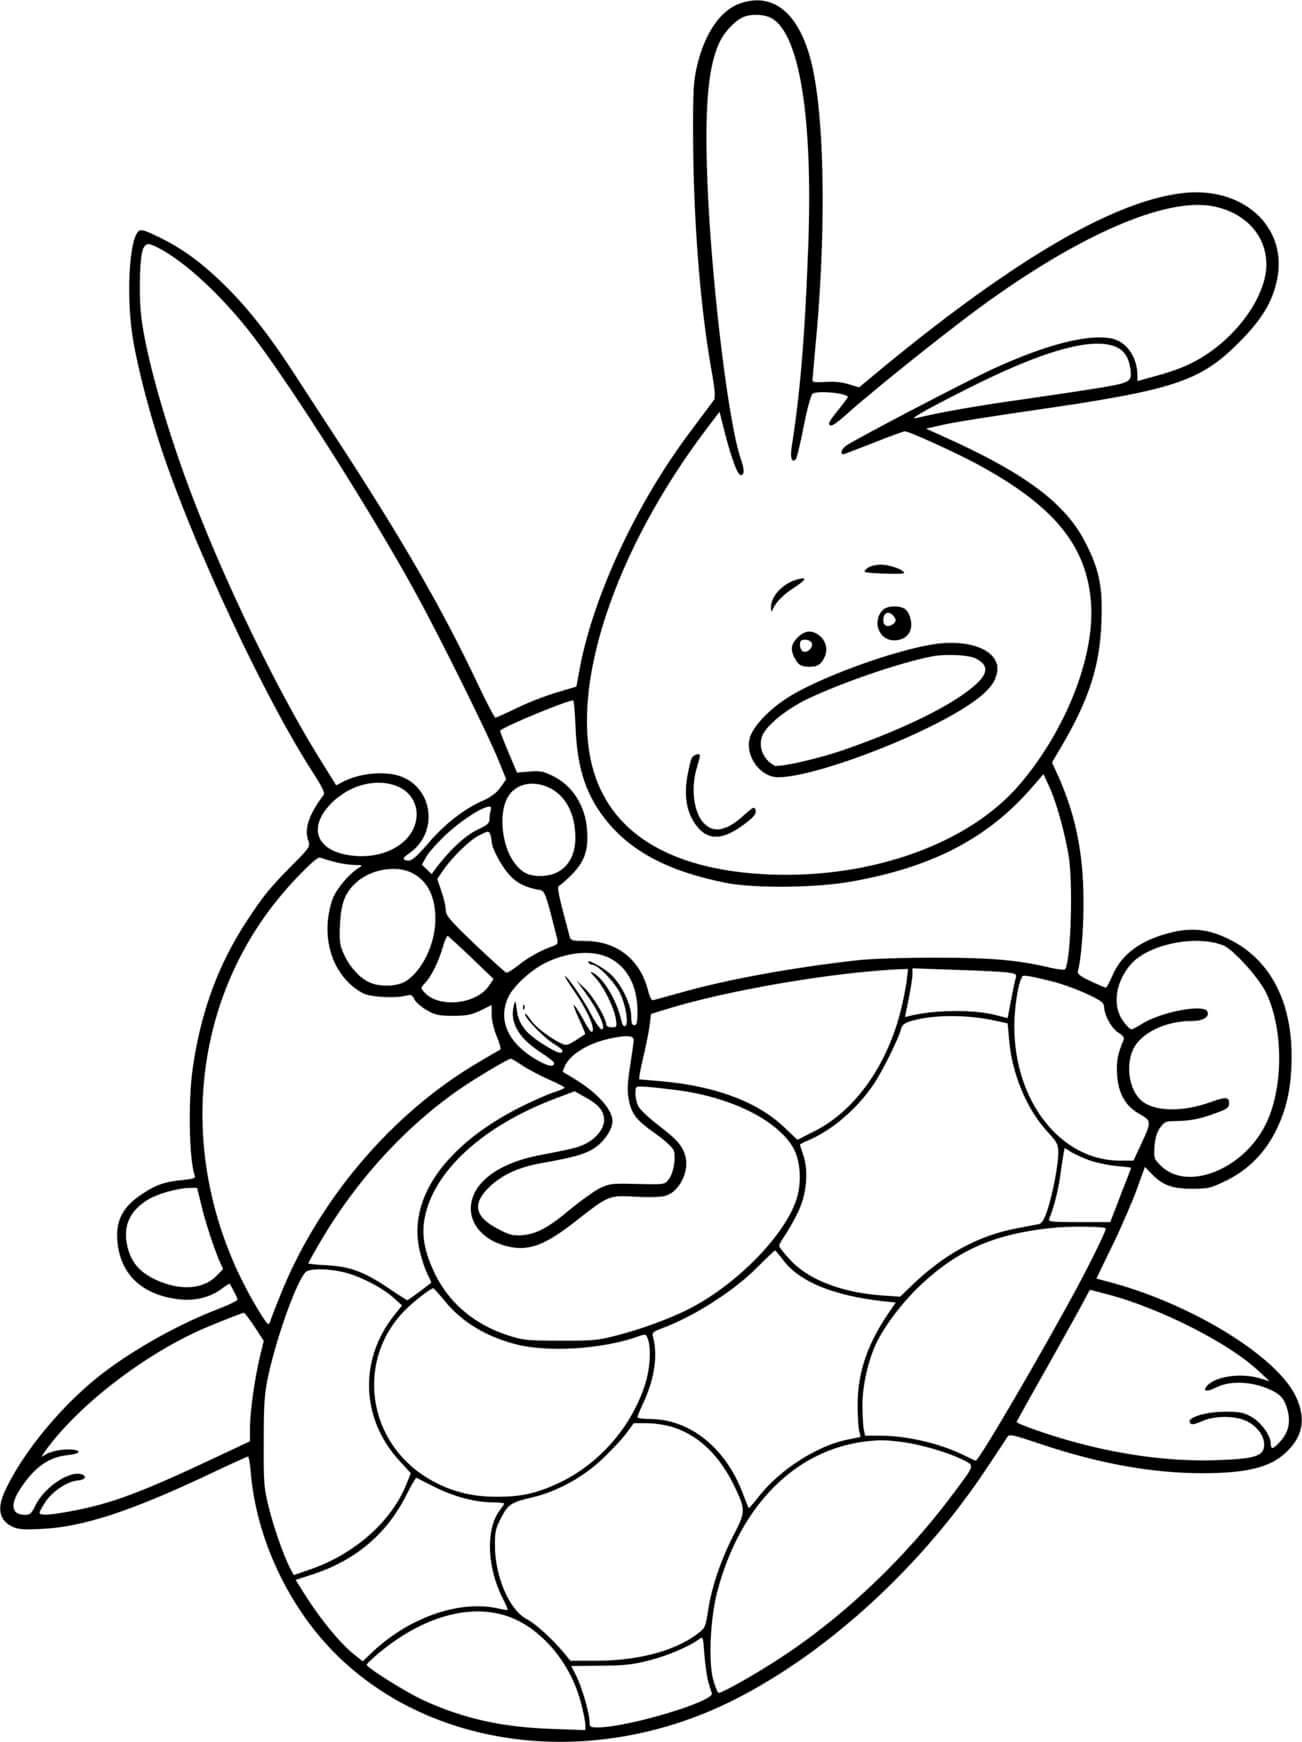 Easter Bunny Painting Egg Coloring Page